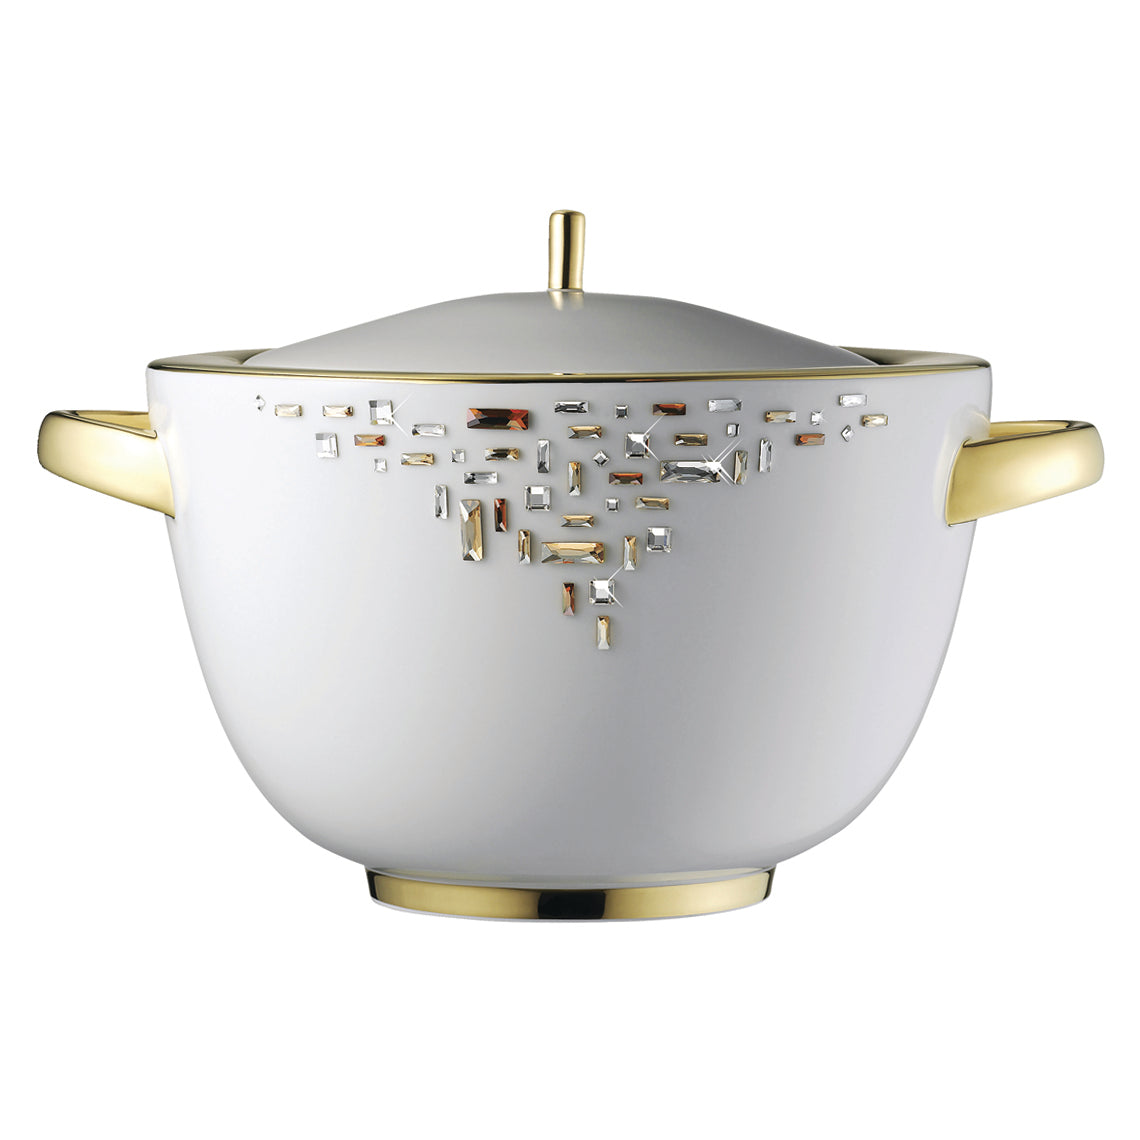 Diana Gold - Covered Vegetable Bowl / Soup Tureen